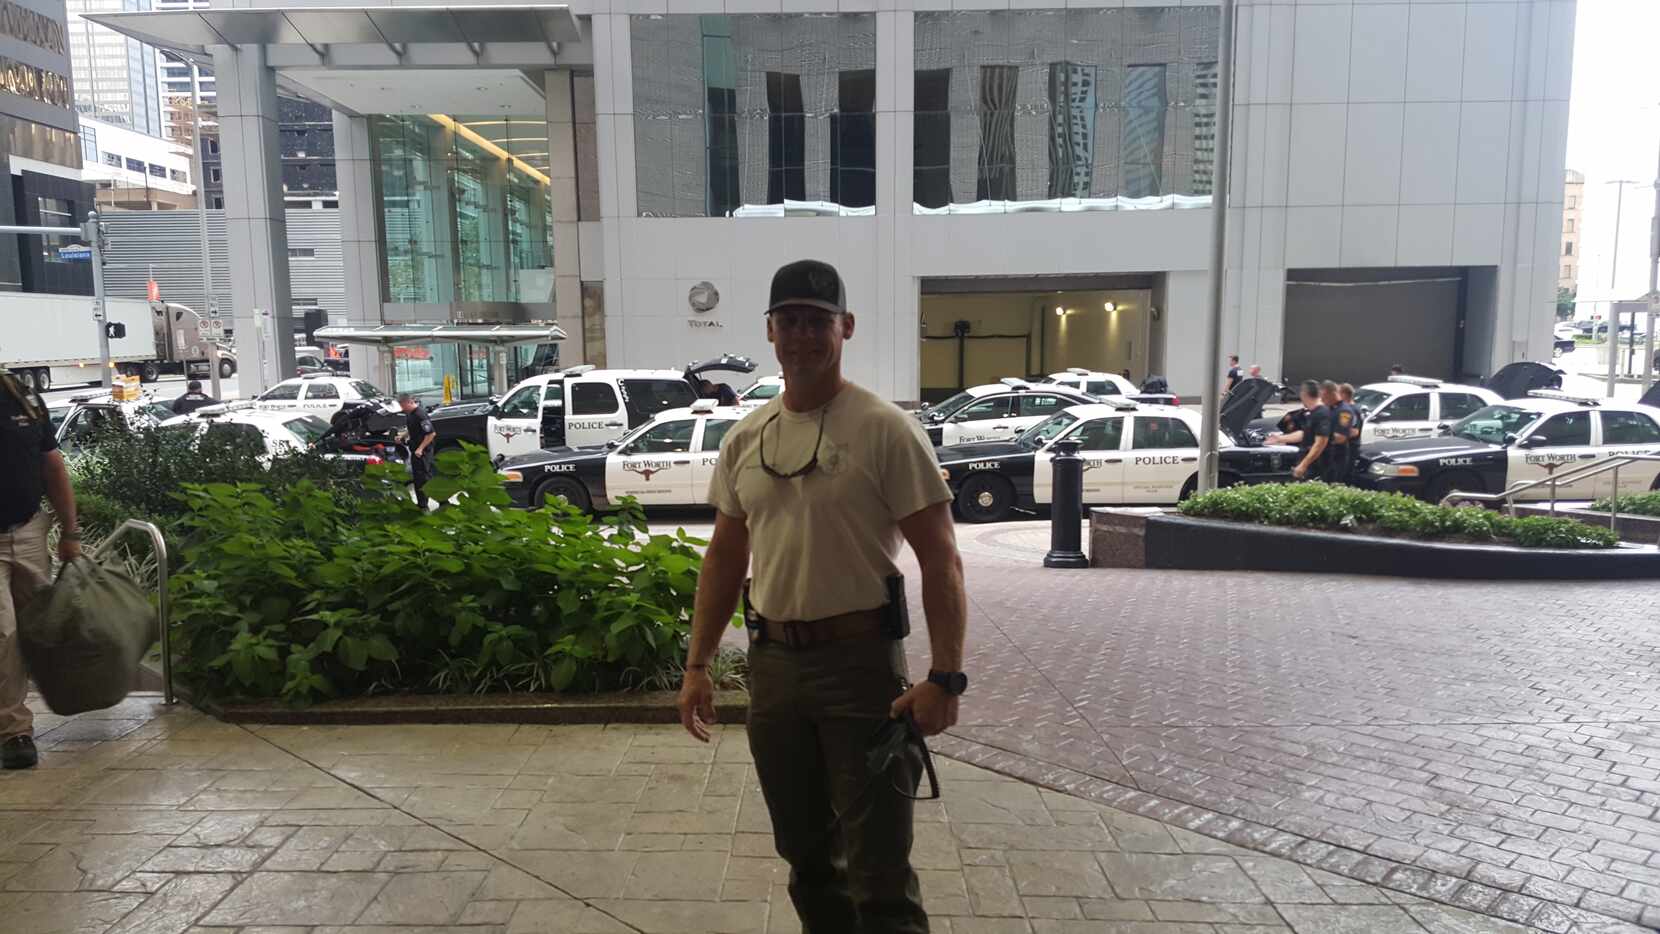 Fort Worth police Officer James Pinkston stands ready to help Houston. He arrived Wednesday...